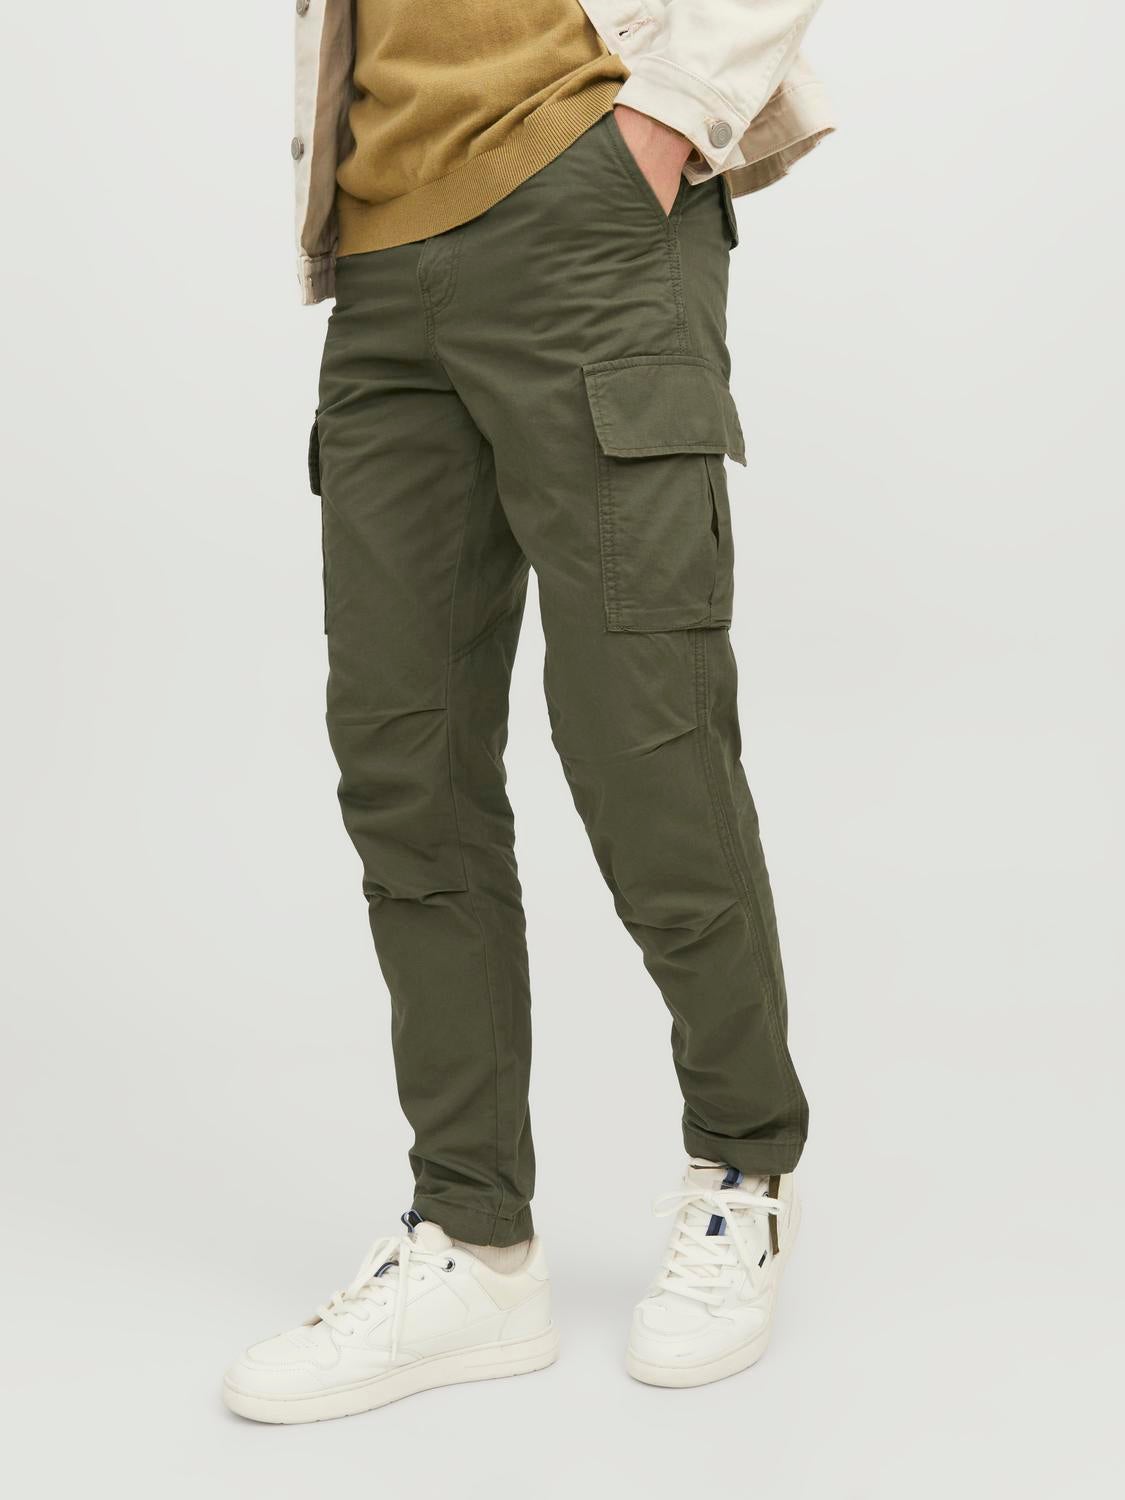 Kombat Trousers. Combat Trousers Olive Green. ALL SIZES